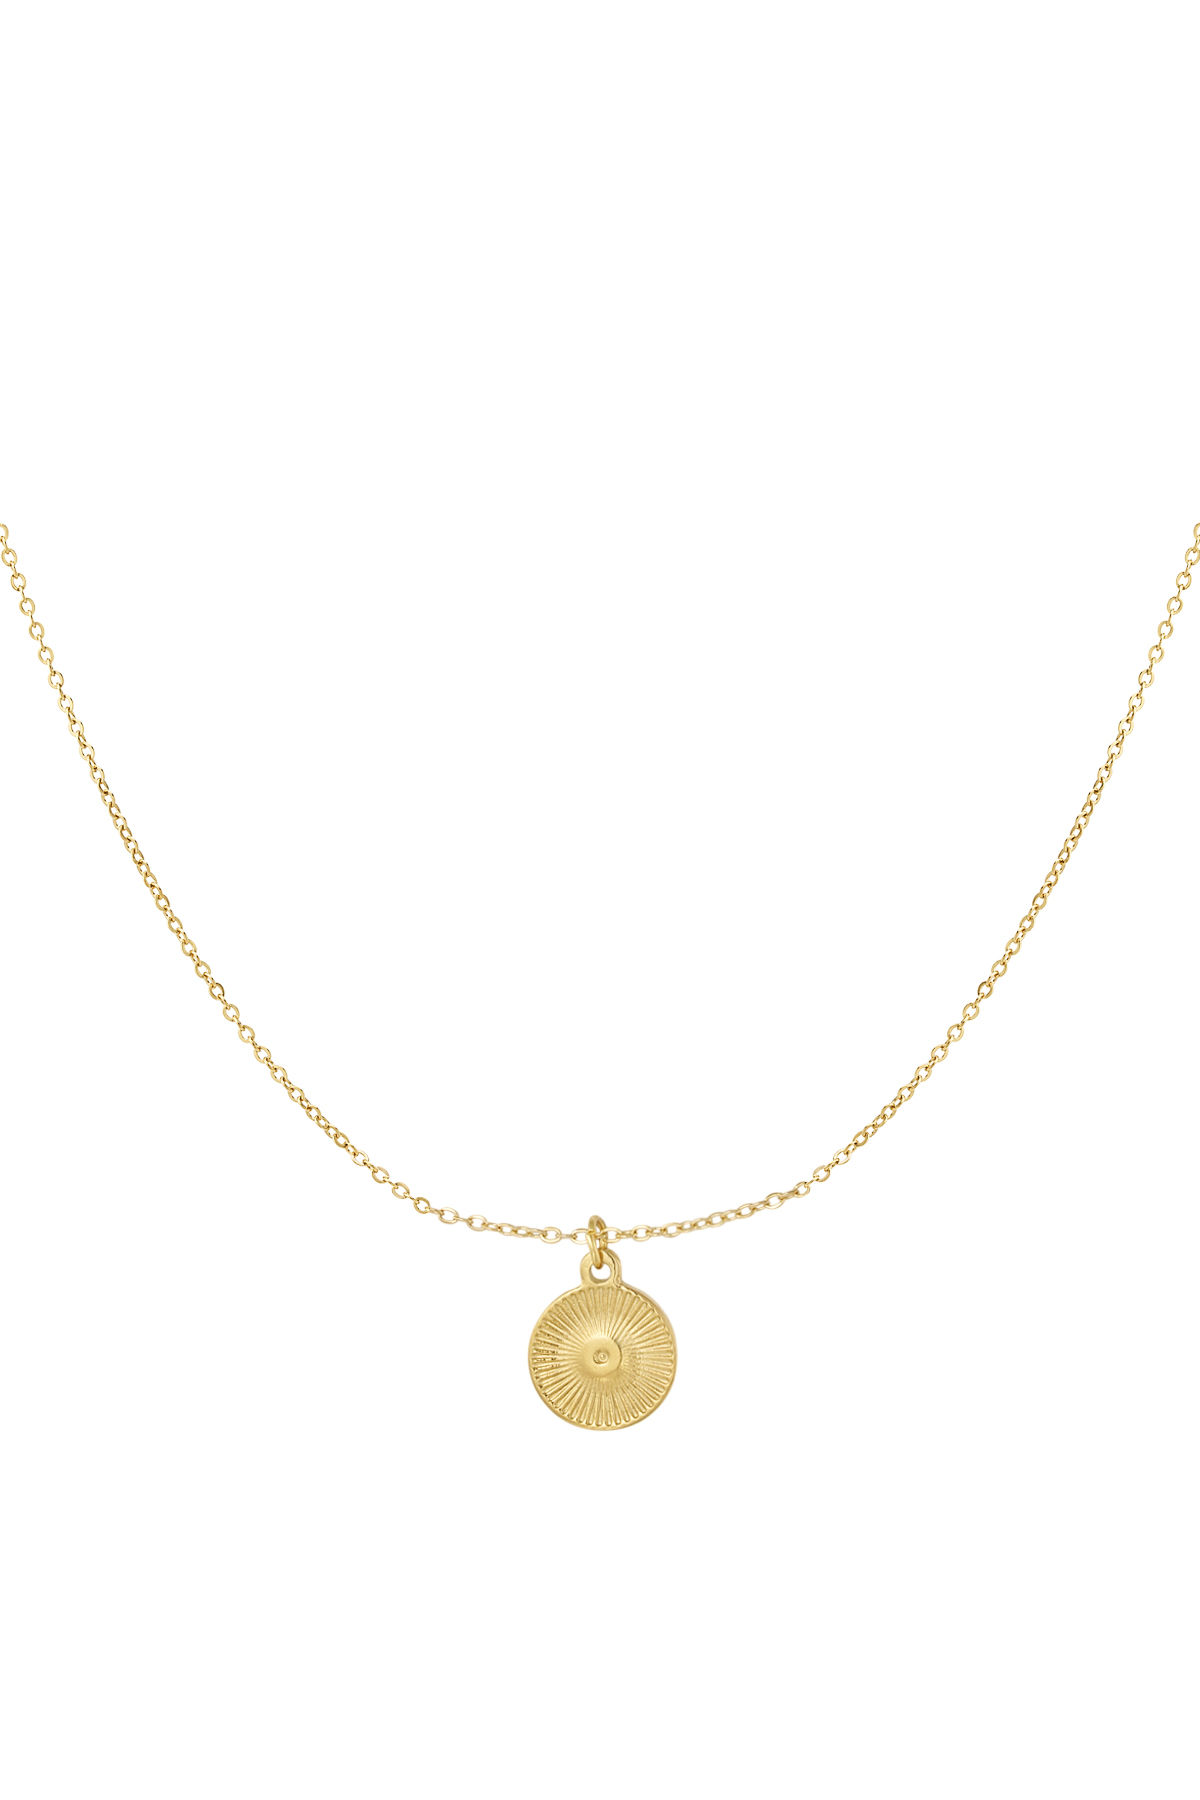 Necklace round coin - gold